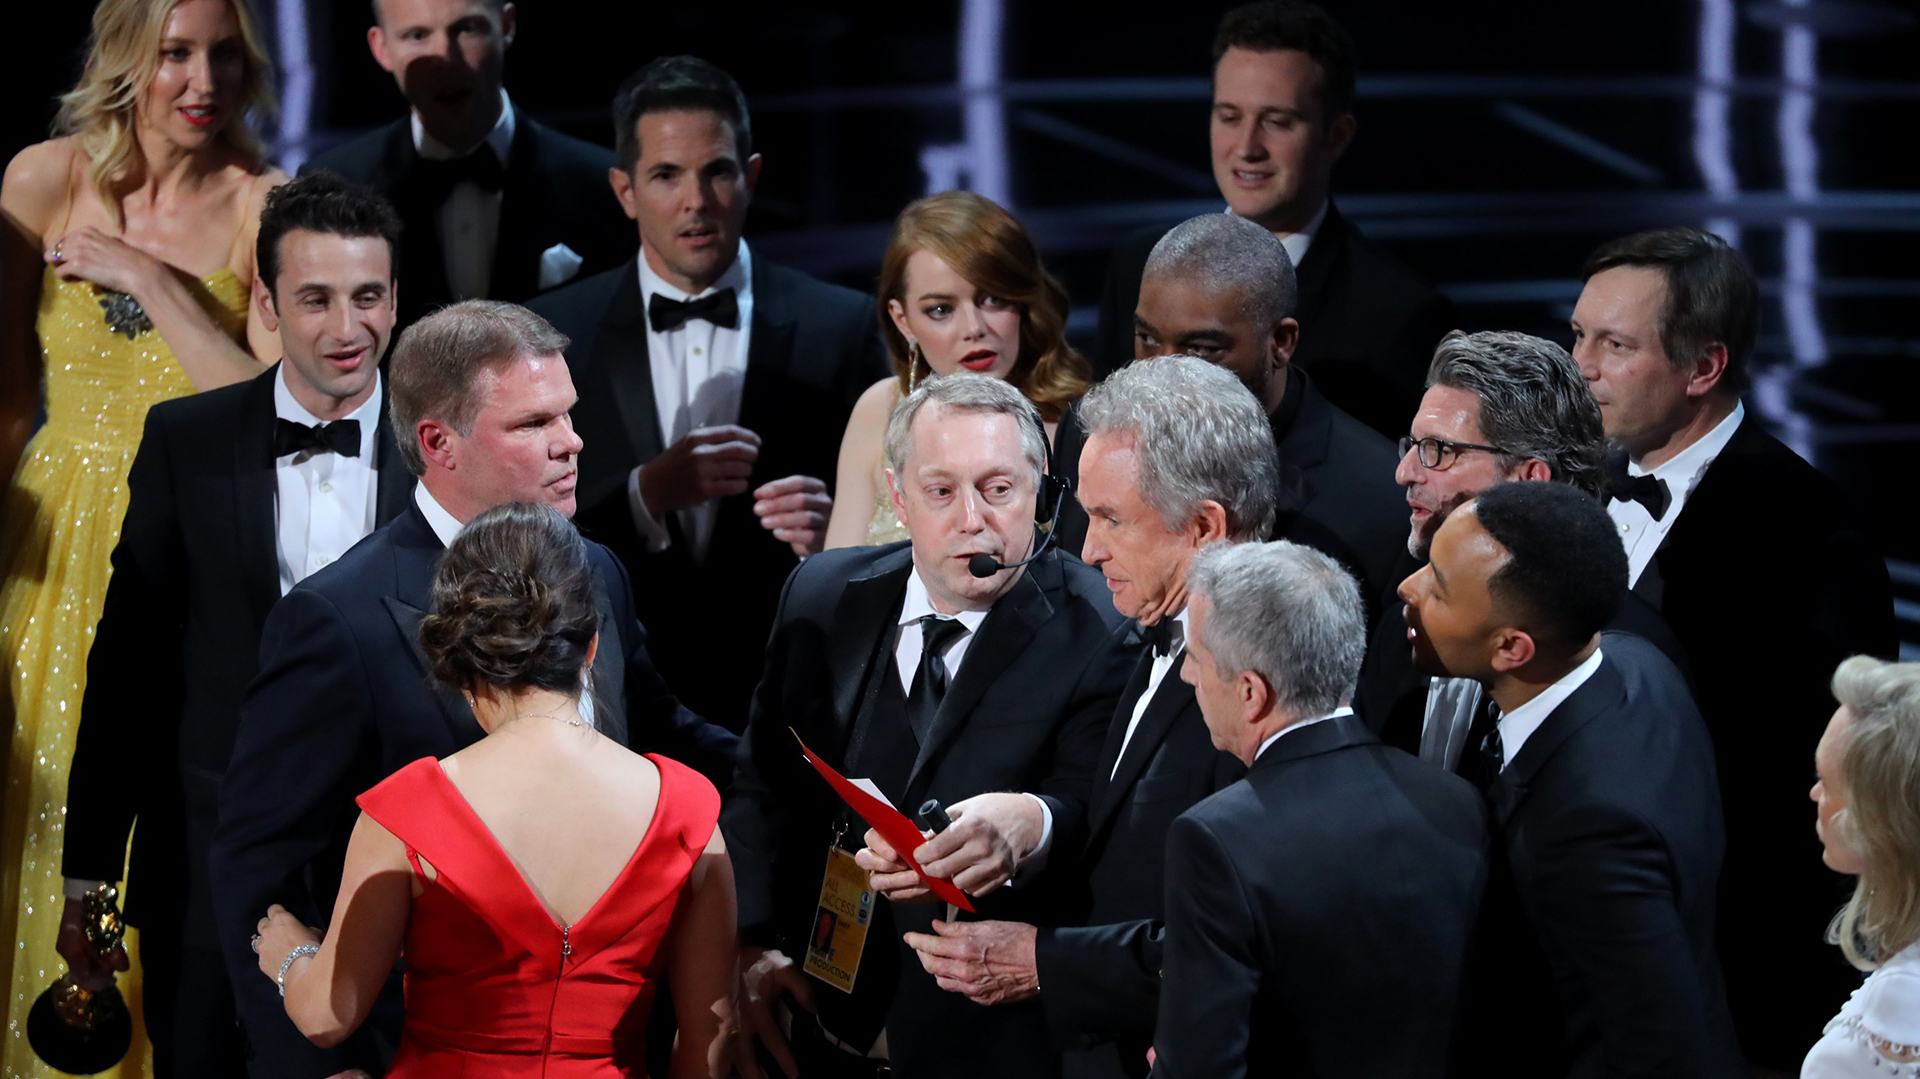 The famous mistake of 2017, when "La La Land" was announced as a winning film, even though it was not.  (Reuters)